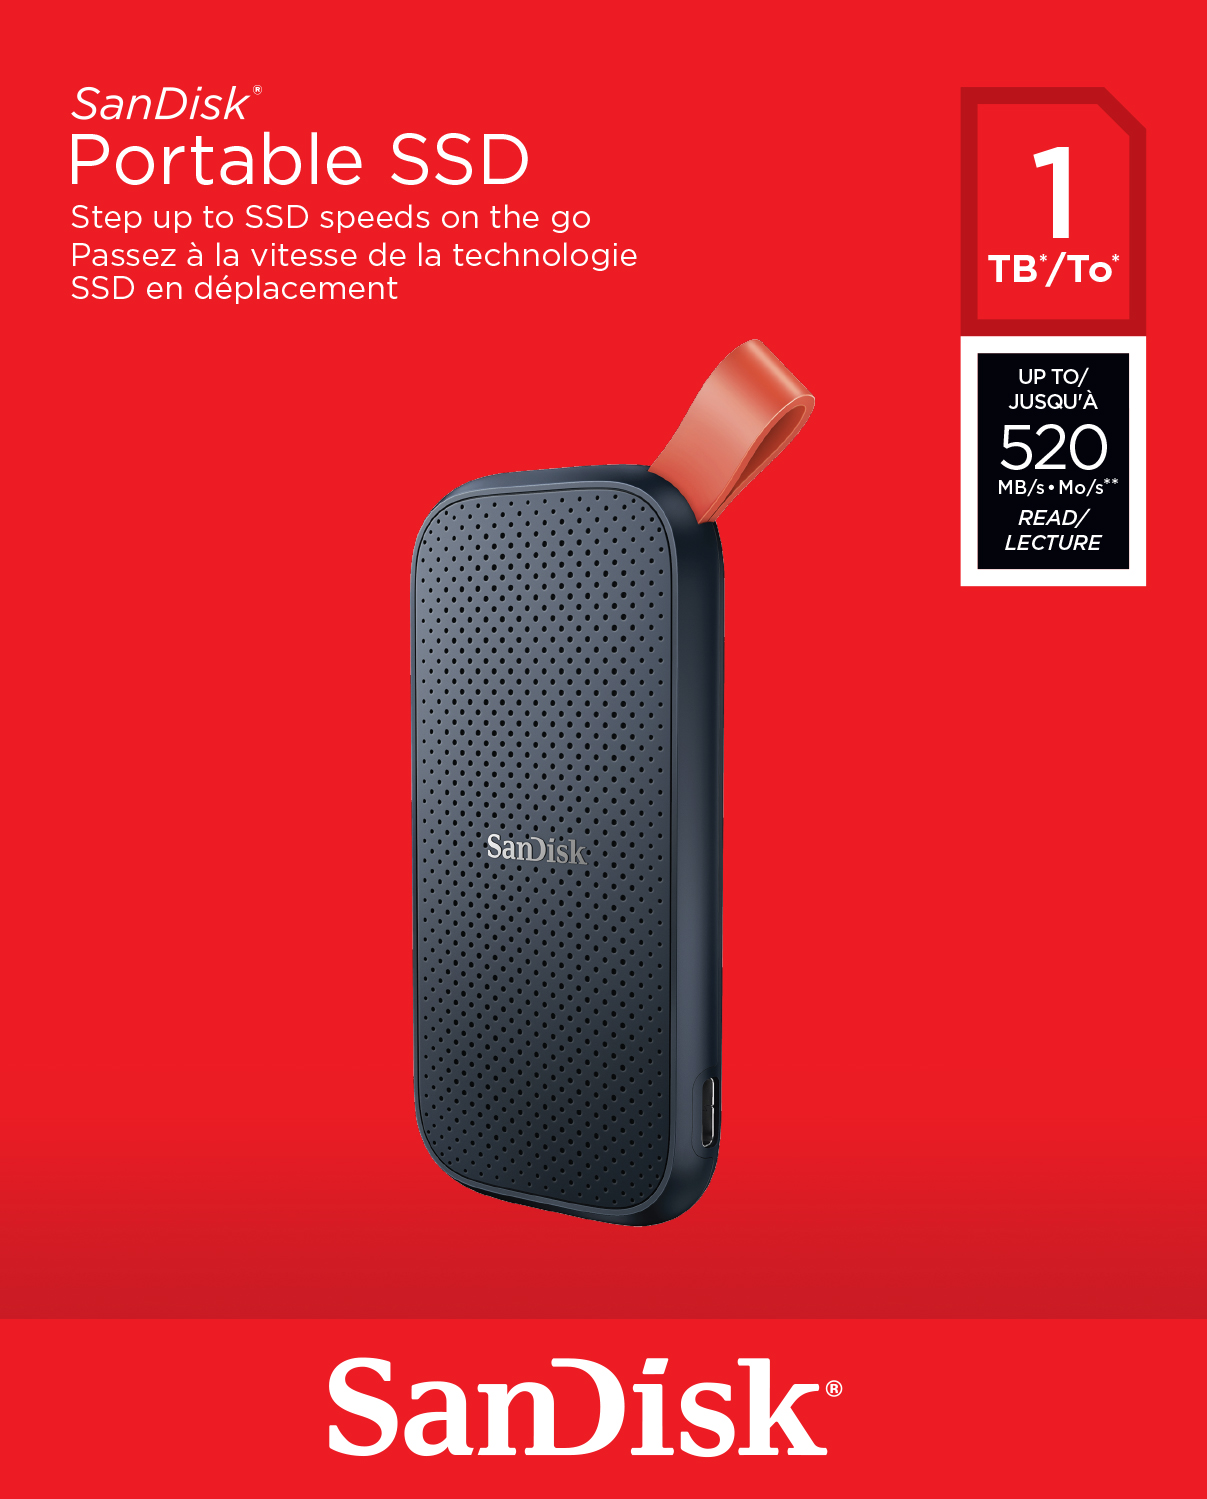 firkant Ged Pakistan Sandisk SanDisk Portable SSD 1TB Accessories | Heathrow Reserve & Collect